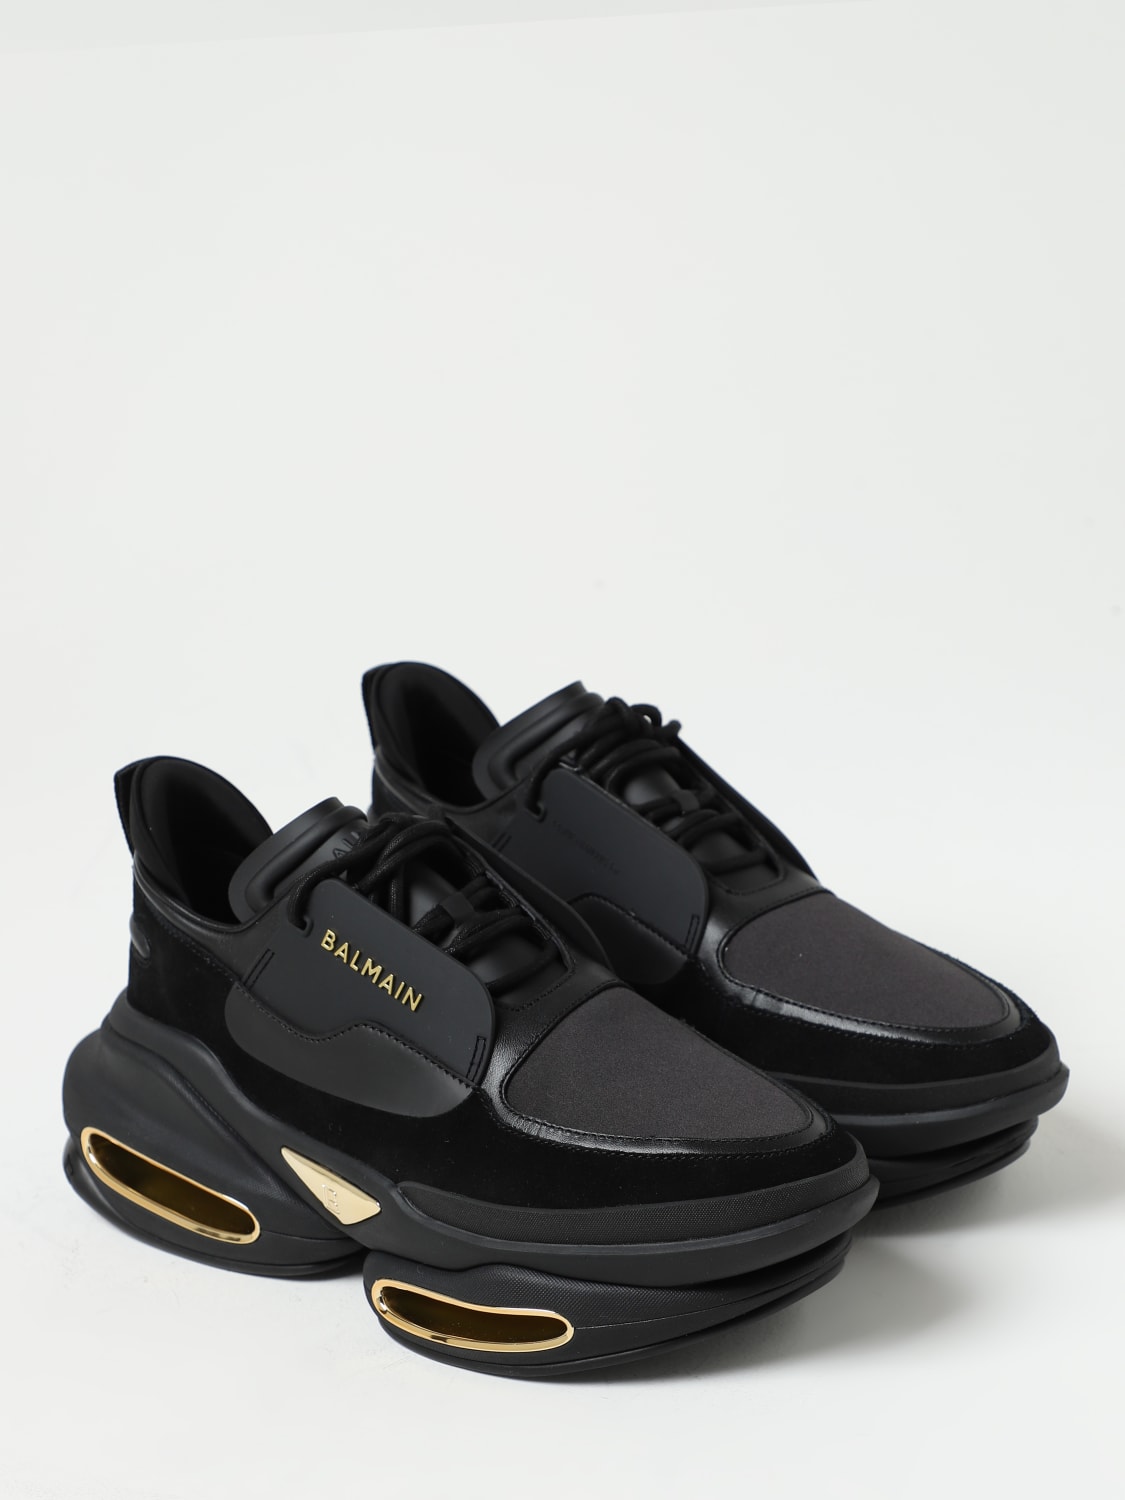 BALMAIN: B-Bold leather sneakers with logo Black | Balmain sneakers BM1VI277LSSE online at GIGLIO.COM